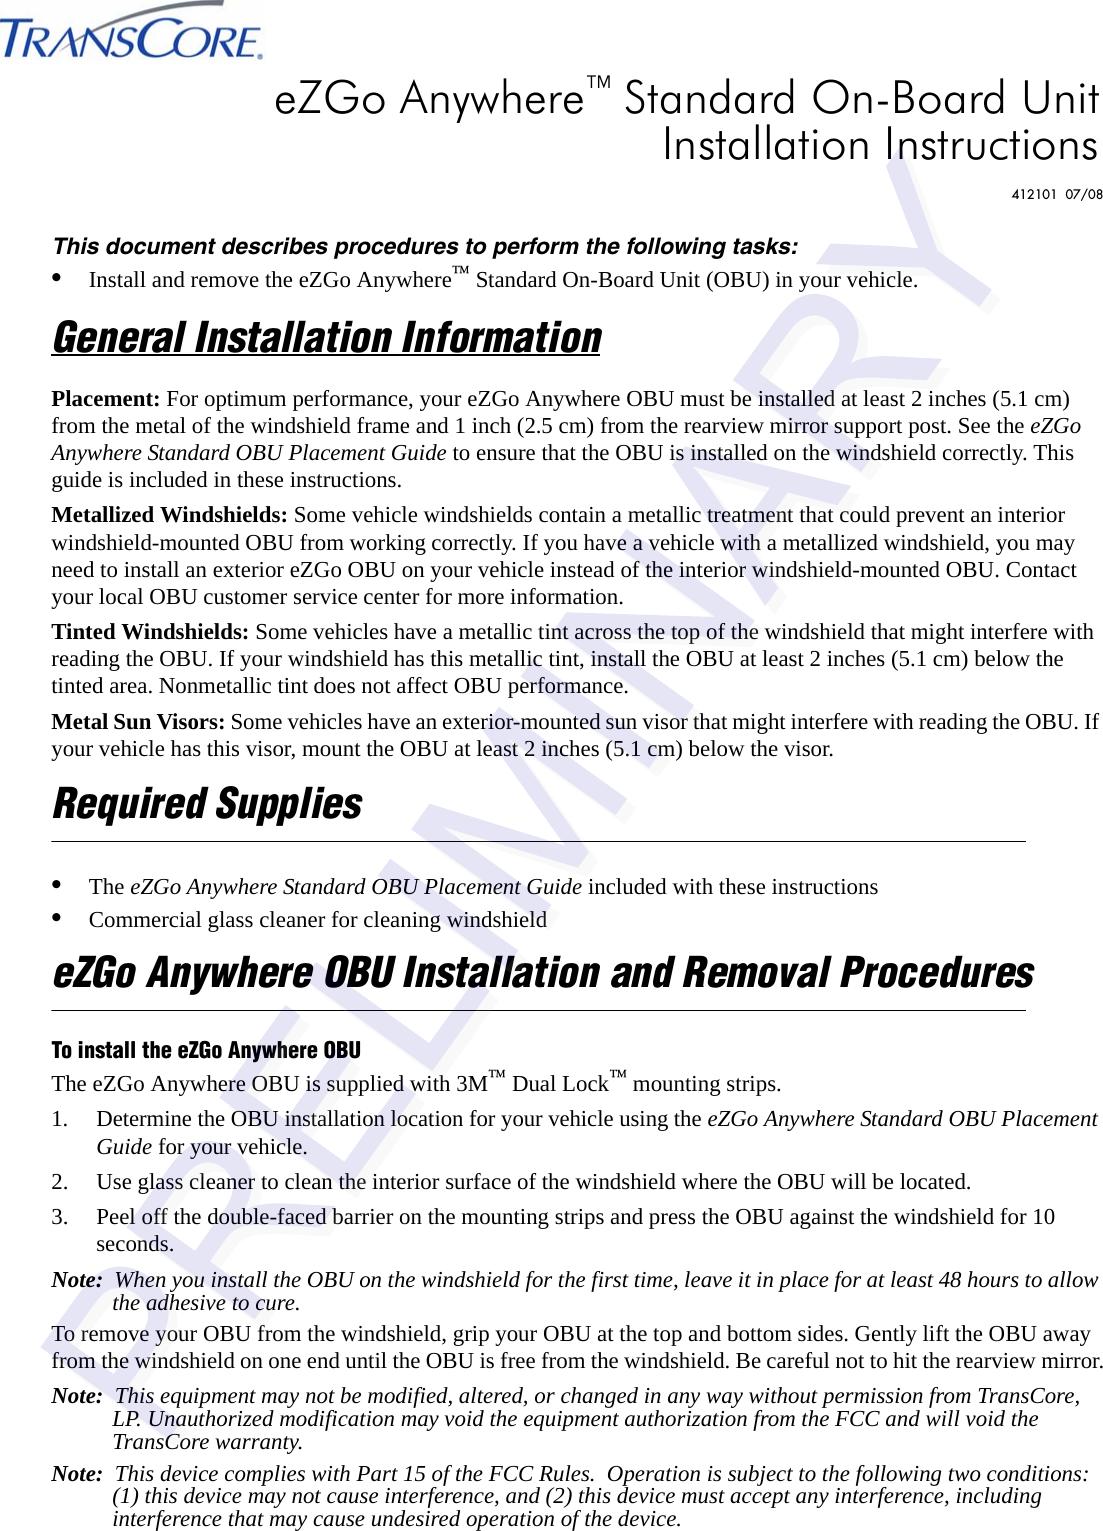 This document describes procedures to perform the following tasks:•Install and remove the eZGo Anywhere™ Standard On-Board Unit (OBU) in your vehicle.General Installation InformationPlacement: For optimum performance, your eZGo Anywhere OBU must be installed at least 2 inches (5.1 cm) from the metal of the windshield frame and 1 inch (2.5 cm) from the rearview mirror support post. See the eZGo Anywhere Standard OBU Placement Guide to ensure that the OBU is installed on the windshield correctly. This guide is included in these instructions.Metallized Windshields: Some vehicle windshields contain a metallic treatment that could prevent an interior windshield-mounted OBU from working correctly. If you have a vehicle with a metallized windshield, you may need to install an exterior eZGo OBU on your vehicle instead of the interior windshield-mounted OBU. Contact your local OBU customer service center for more information.Tinted Windshields: Some vehicles have a metallic tint across the top of the windshield that might interfere with reading the OBU. If your windshield has this metallic tint, install the OBU at least 2 inches (5.1 cm) below the tinted area. Nonmetallic tint does not affect OBU performance.Metal Sun Visors: Some vehicles have an exterior-mounted sun visor that might interfere with reading the OBU. If your vehicle has this visor, mount the OBU at least 2 inches (5.1 cm) below the visor.Required Supplies•The eZGo Anywhere Standard OBU Placement Guide included with these instructions•Commercial glass cleaner for cleaning windshieldeZGo Anywhere OBU Installation and Removal ProceduresTo install the eZGo Anywhere OBUThe eZGo Anywhere OBU is supplied with 3M™ Dual Lock™ mounting strips.1. Determine the OBU installation location for your vehicle using the eZGo Anywhere Standard OBU Placement Guide for your vehicle.2. Use glass cleaner to clean the interior surface of the windshield where the OBU will be located.3. Peel off the double-faced barrier on the mounting strips and press the OBU against the windshield for 10 seconds.Note:  When you install the OBU on the windshield for the first time, leave it in place for at least 48 hours to allow the adhesive to cure.To remove your OBU from the windshield, grip your OBU at the top and bottom sides. Gently lift the OBU away from the windshield on one end until the OBU is free from the windshield. Be careful not to hit the rearview mirror.Note:  This equipment may not be modified, altered, or changed in any way without permission from TransCore, LP. Unauthorized modification may void the equipment authorization from the FCC and will void the TransCore warranty.Note:  This device complies with Part 15 of the FCC Rules.  Operation is subject to the following two conditions:  (1) this device may not cause interference, and (2) this device must accept any interference, including interference that may cause undesired operation of the device.eZGo Anywhere™ Standard On-Board UnitInstallation Instructions412101  07/08